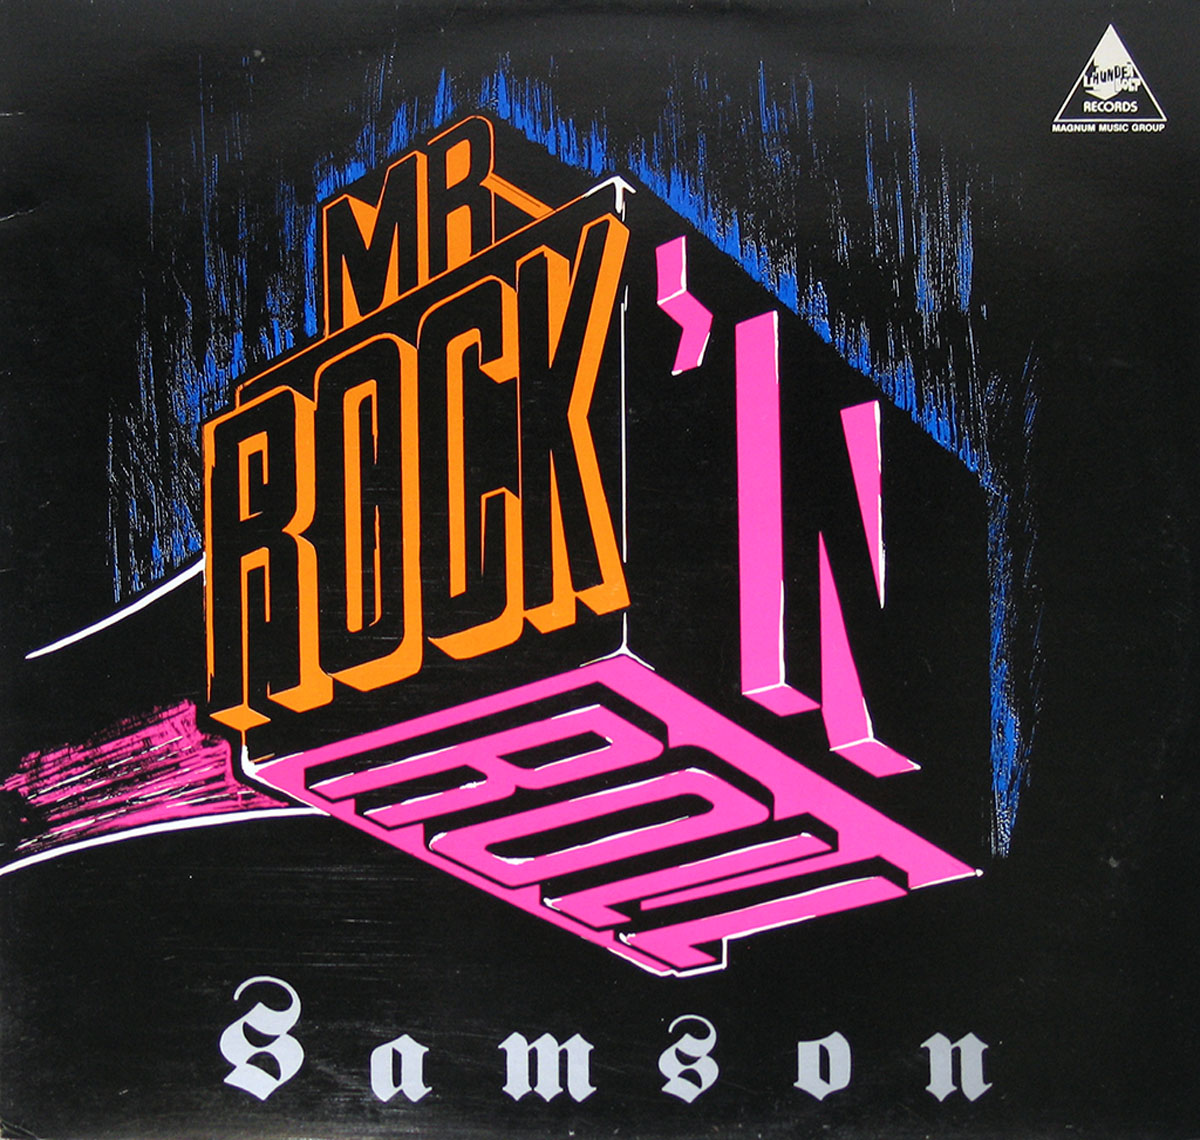 High Resolution Photos of samson mr rock and roll 